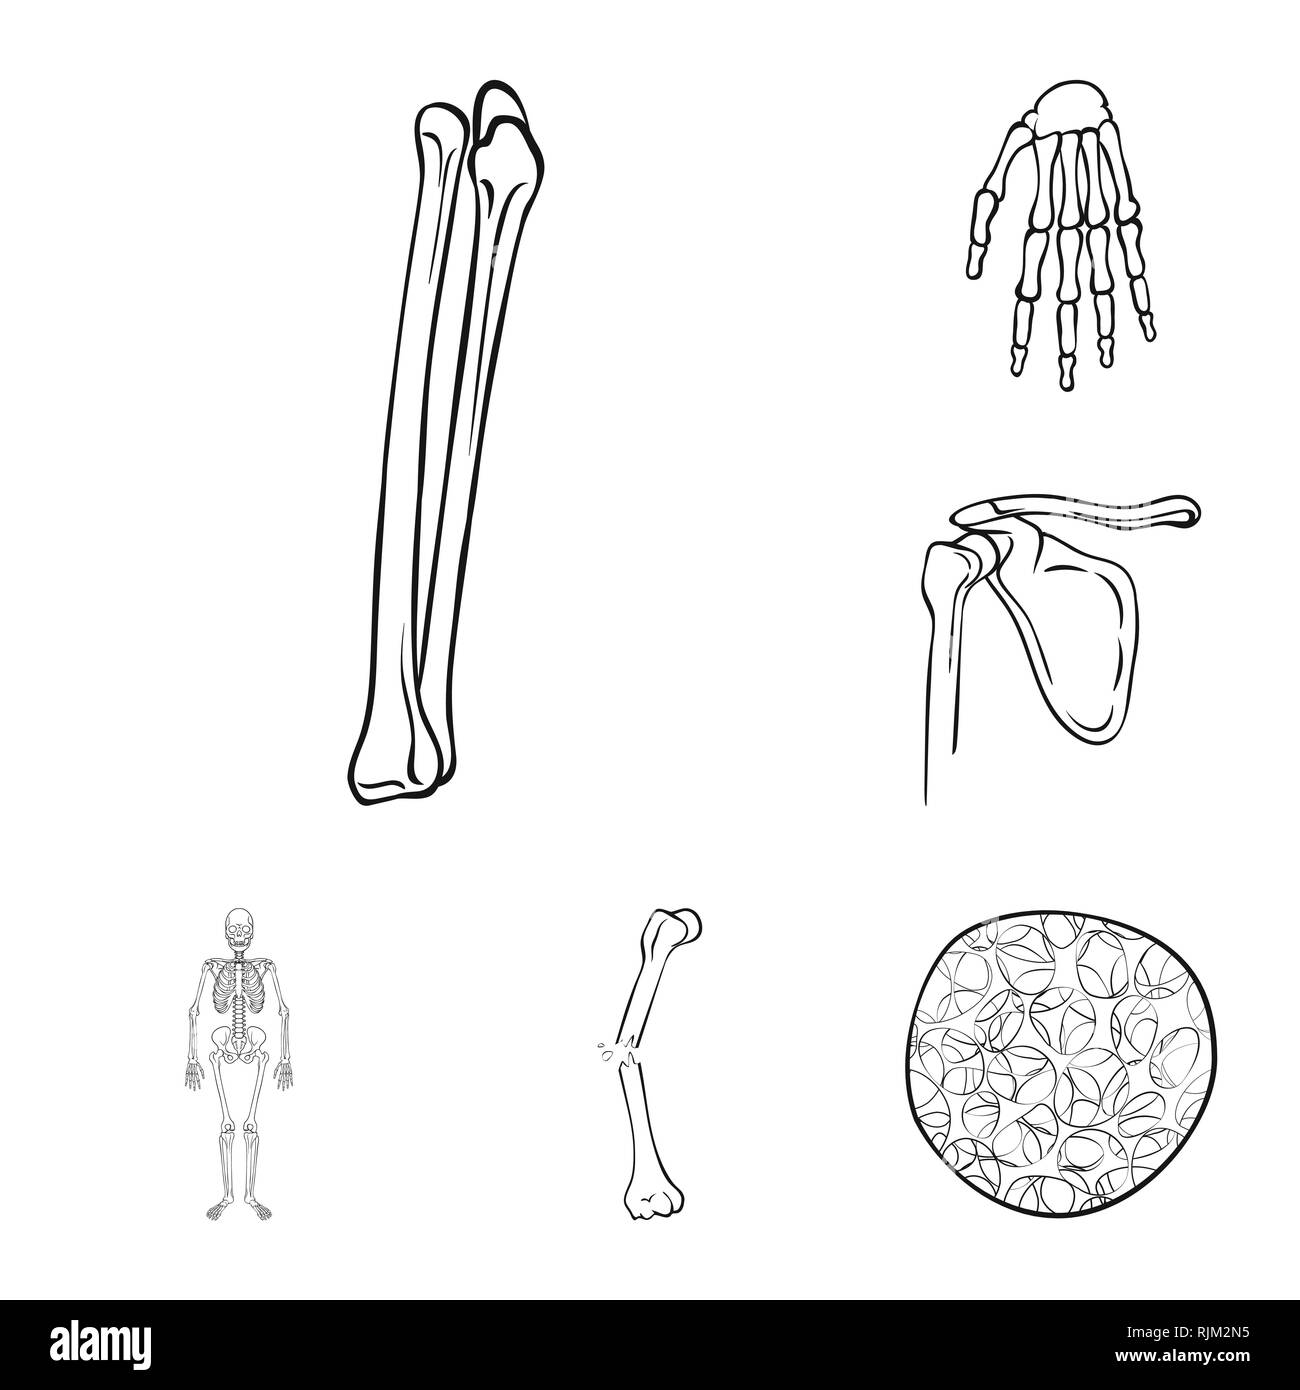 femur,wrist,musculoskeletal,fracture,osteoporosis,hand,pelvis,scientific,pain,cell,knee,arm,skeletal,connective,tibia,carpus,leg,system,cartilage,fibula,health,surgery,body,fiber,alignment,xray,healthy,skull,structure,medicine,clinic,biology,medical,bone,skeleton,anatomy,human,organs,set,vector,icon,illustration,isolated,collection,design,element,graphic,sign,outline,line Vector Vectors , Stock Vector